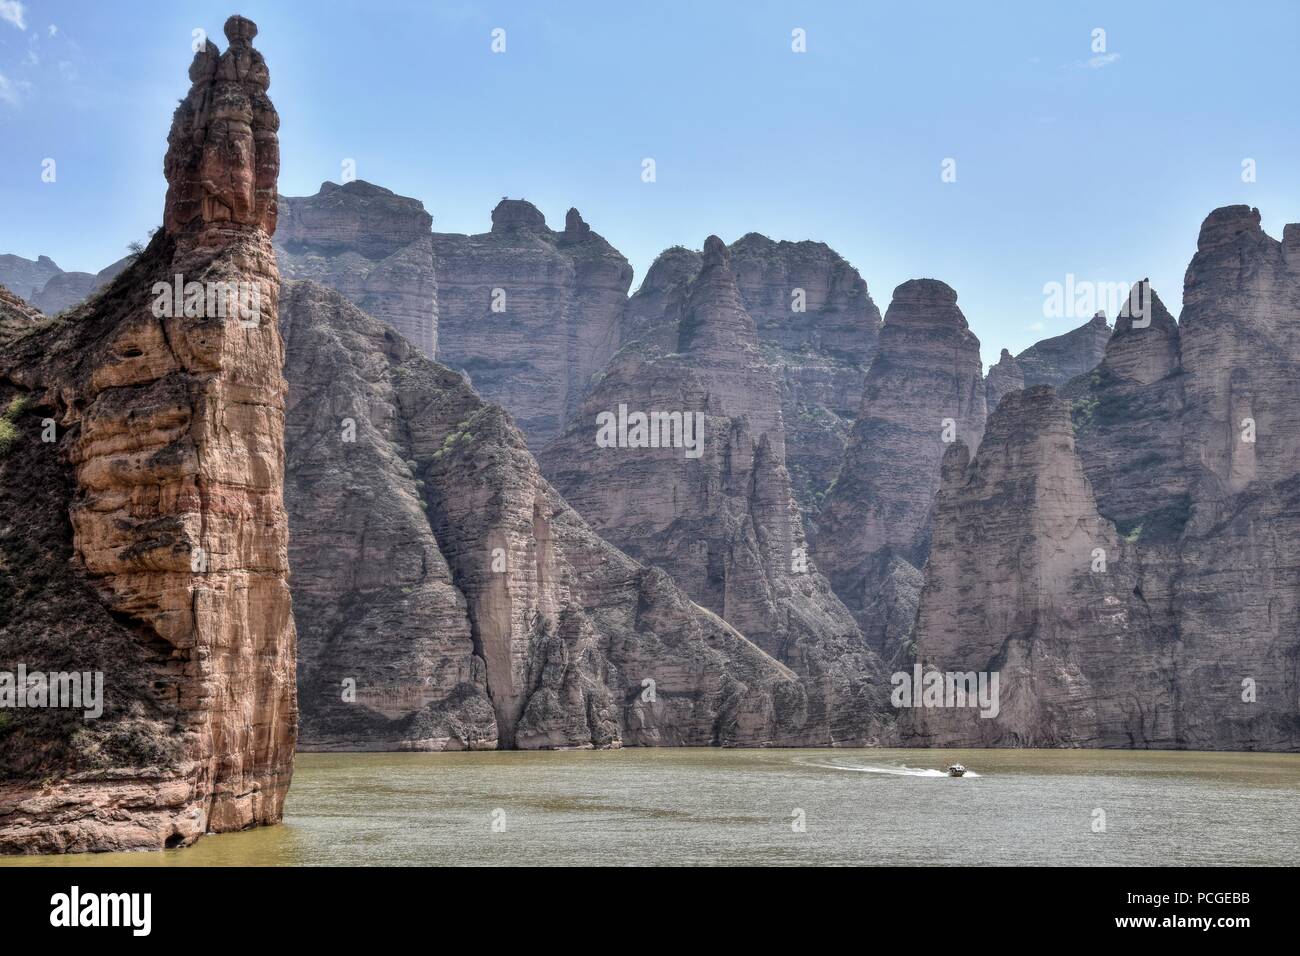 Liujiaxia Dam the picturesque place near the Bingling Cave with great rock formations along the Yellow River. Stock Photo